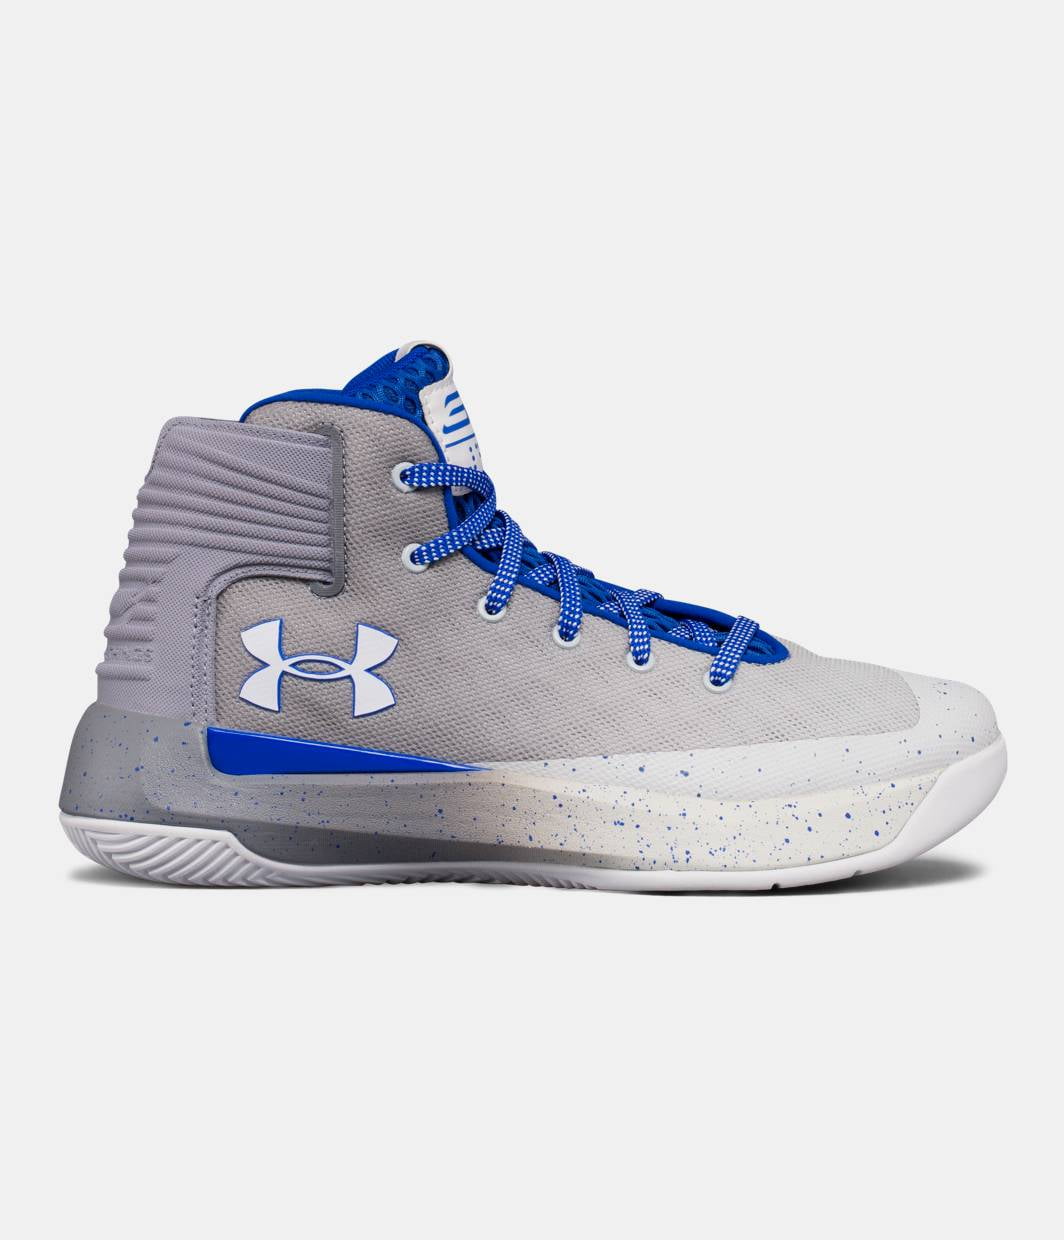 UNDER ARMOUR CURRY 3 Toddler Boys Basketball Shoes White/Blue Size 11 